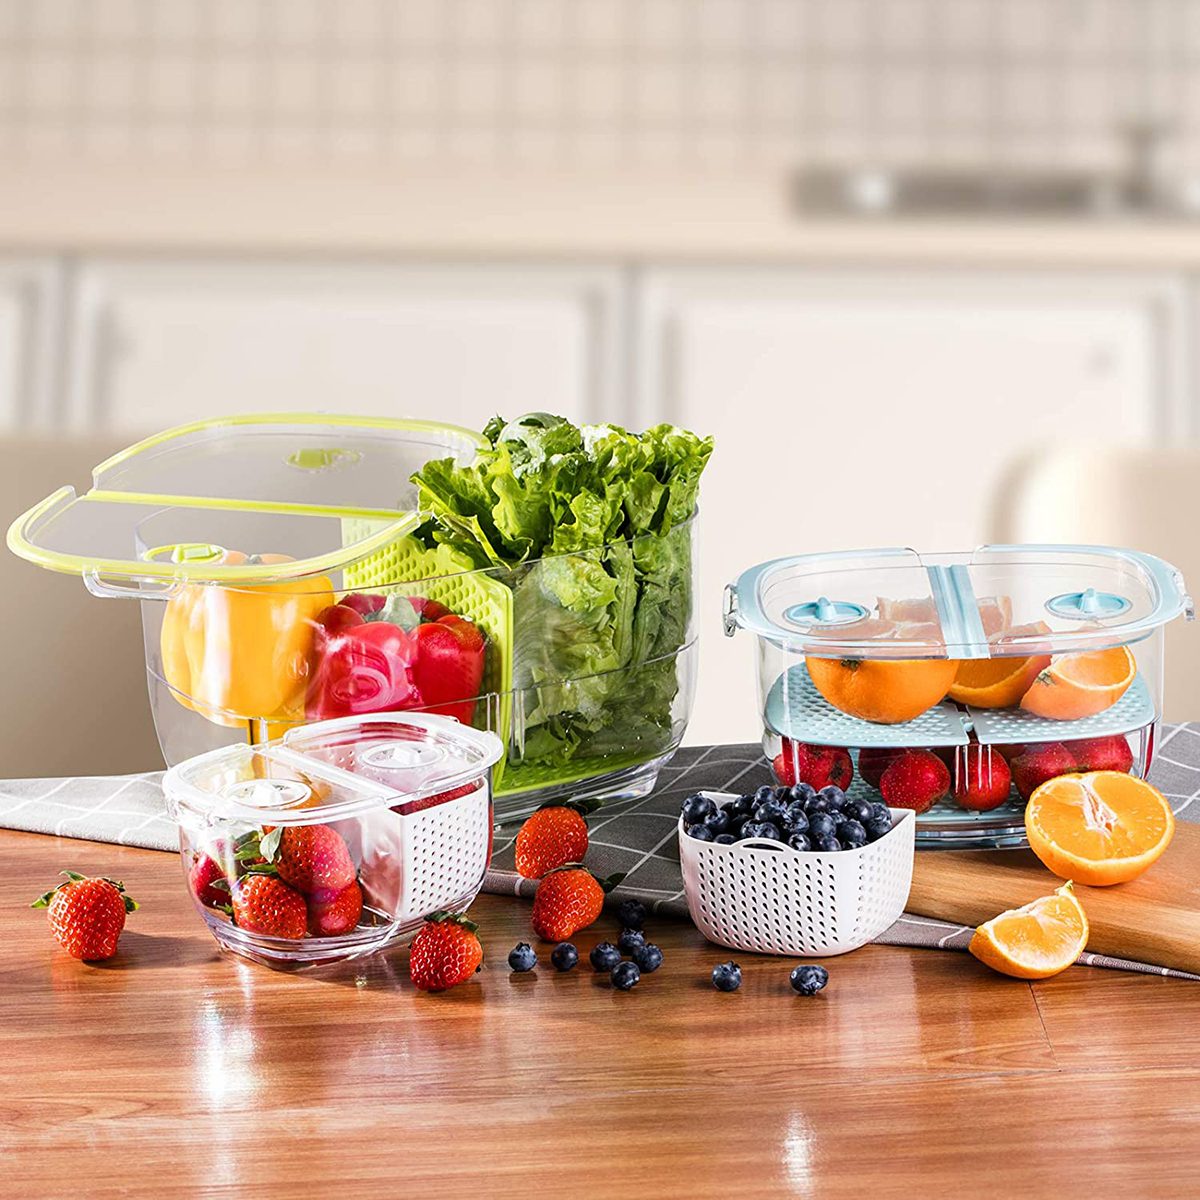 https://www.tasteofhome.com/wp-content/uploads/2019/02/LUXEAR-Produce-Veggie-Storage-Containers.jpg?fit=696%2C696